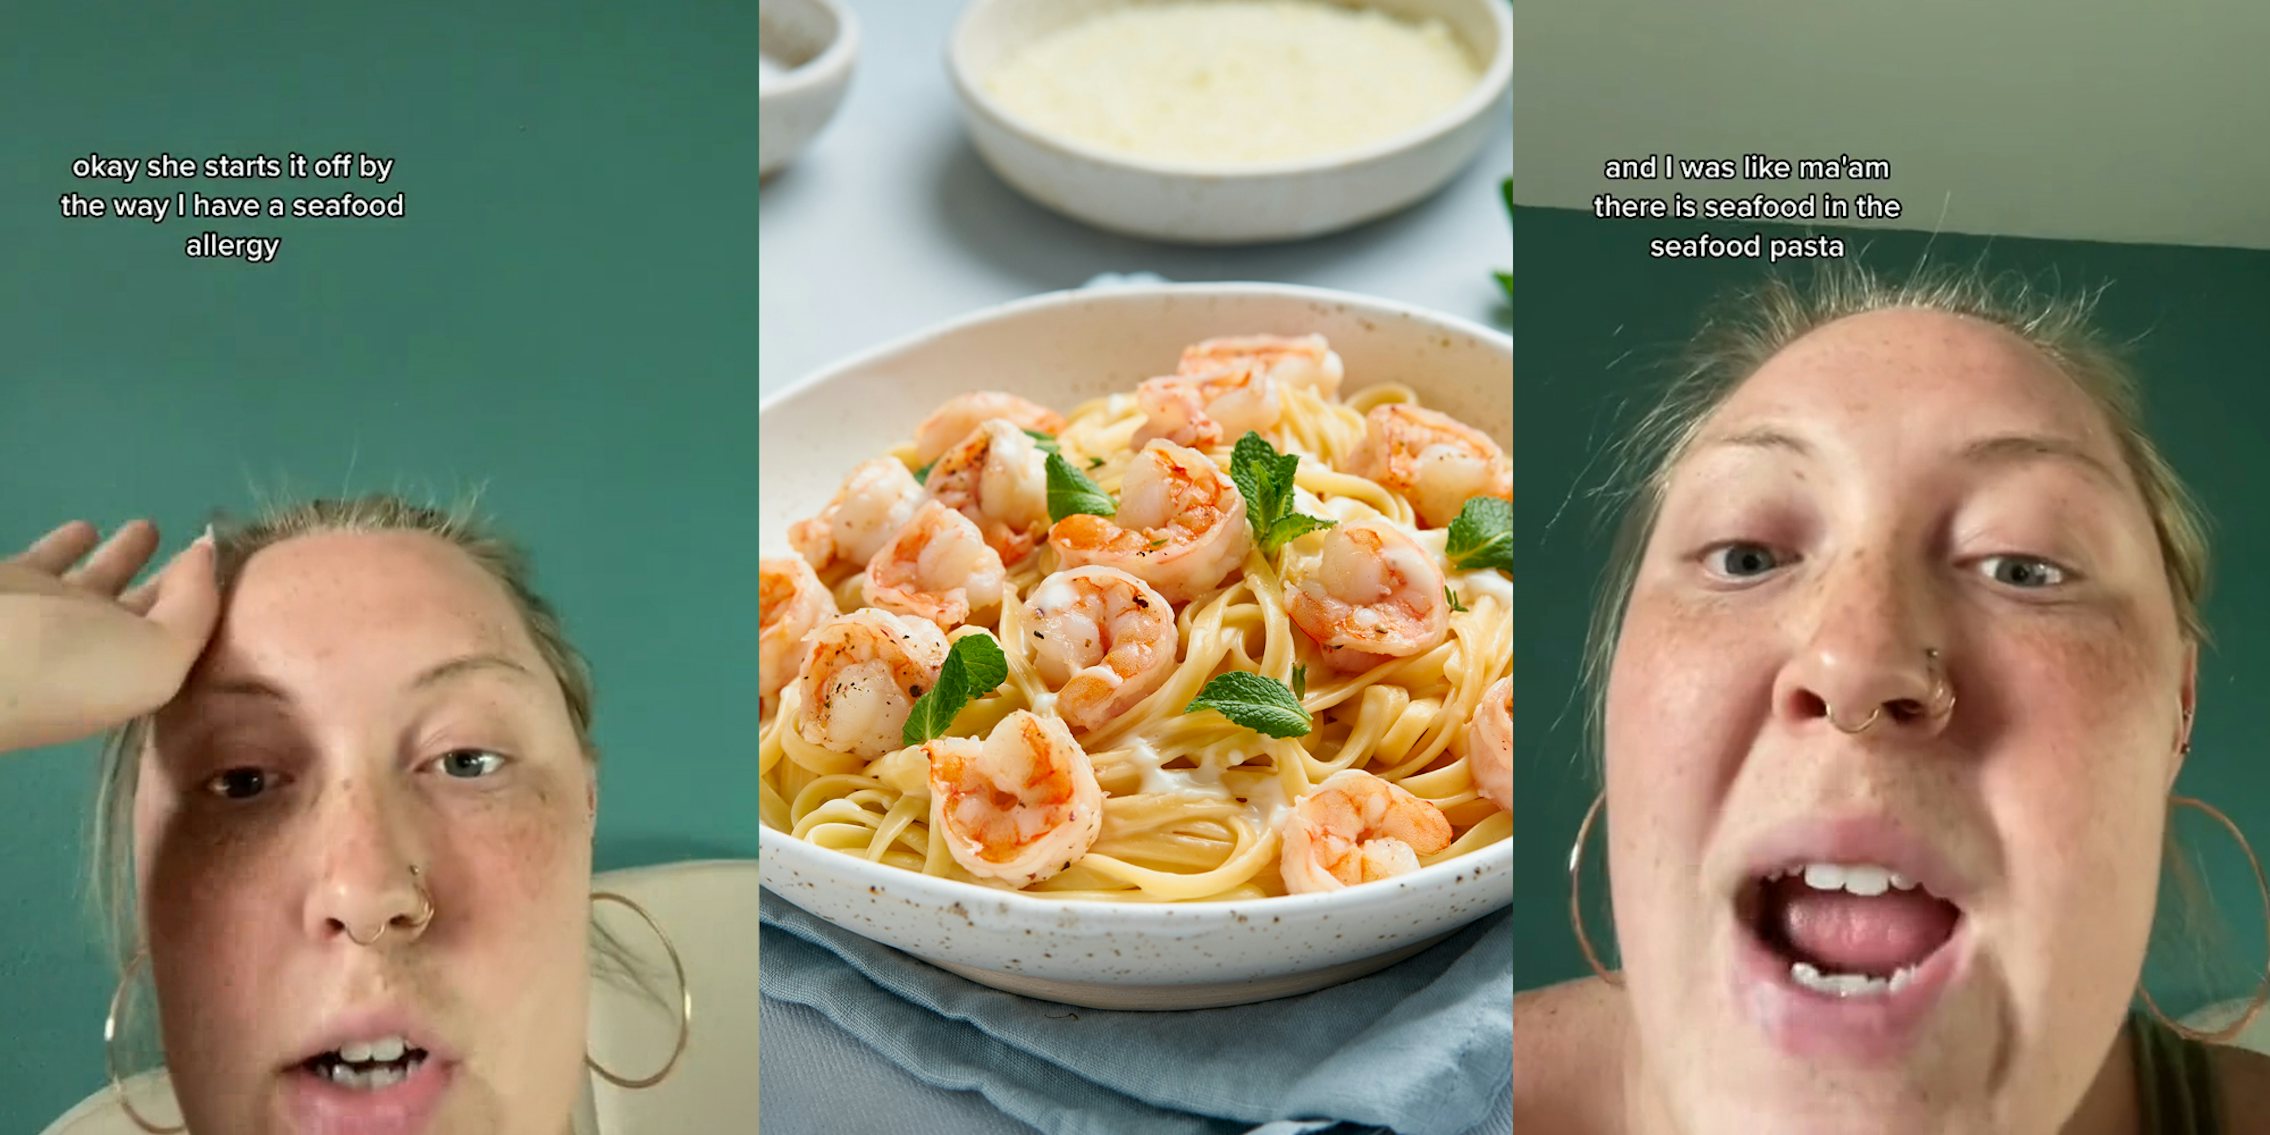 server speaking in front of green wall with caption 'okay she starts it off by the way I have a seafood allergy' (l) seafood pasta in bowl in front of light blue background (c) server speaking in front of green wall with caption 'and I was like ma'am there is seafood in the seafood pasta' (r)